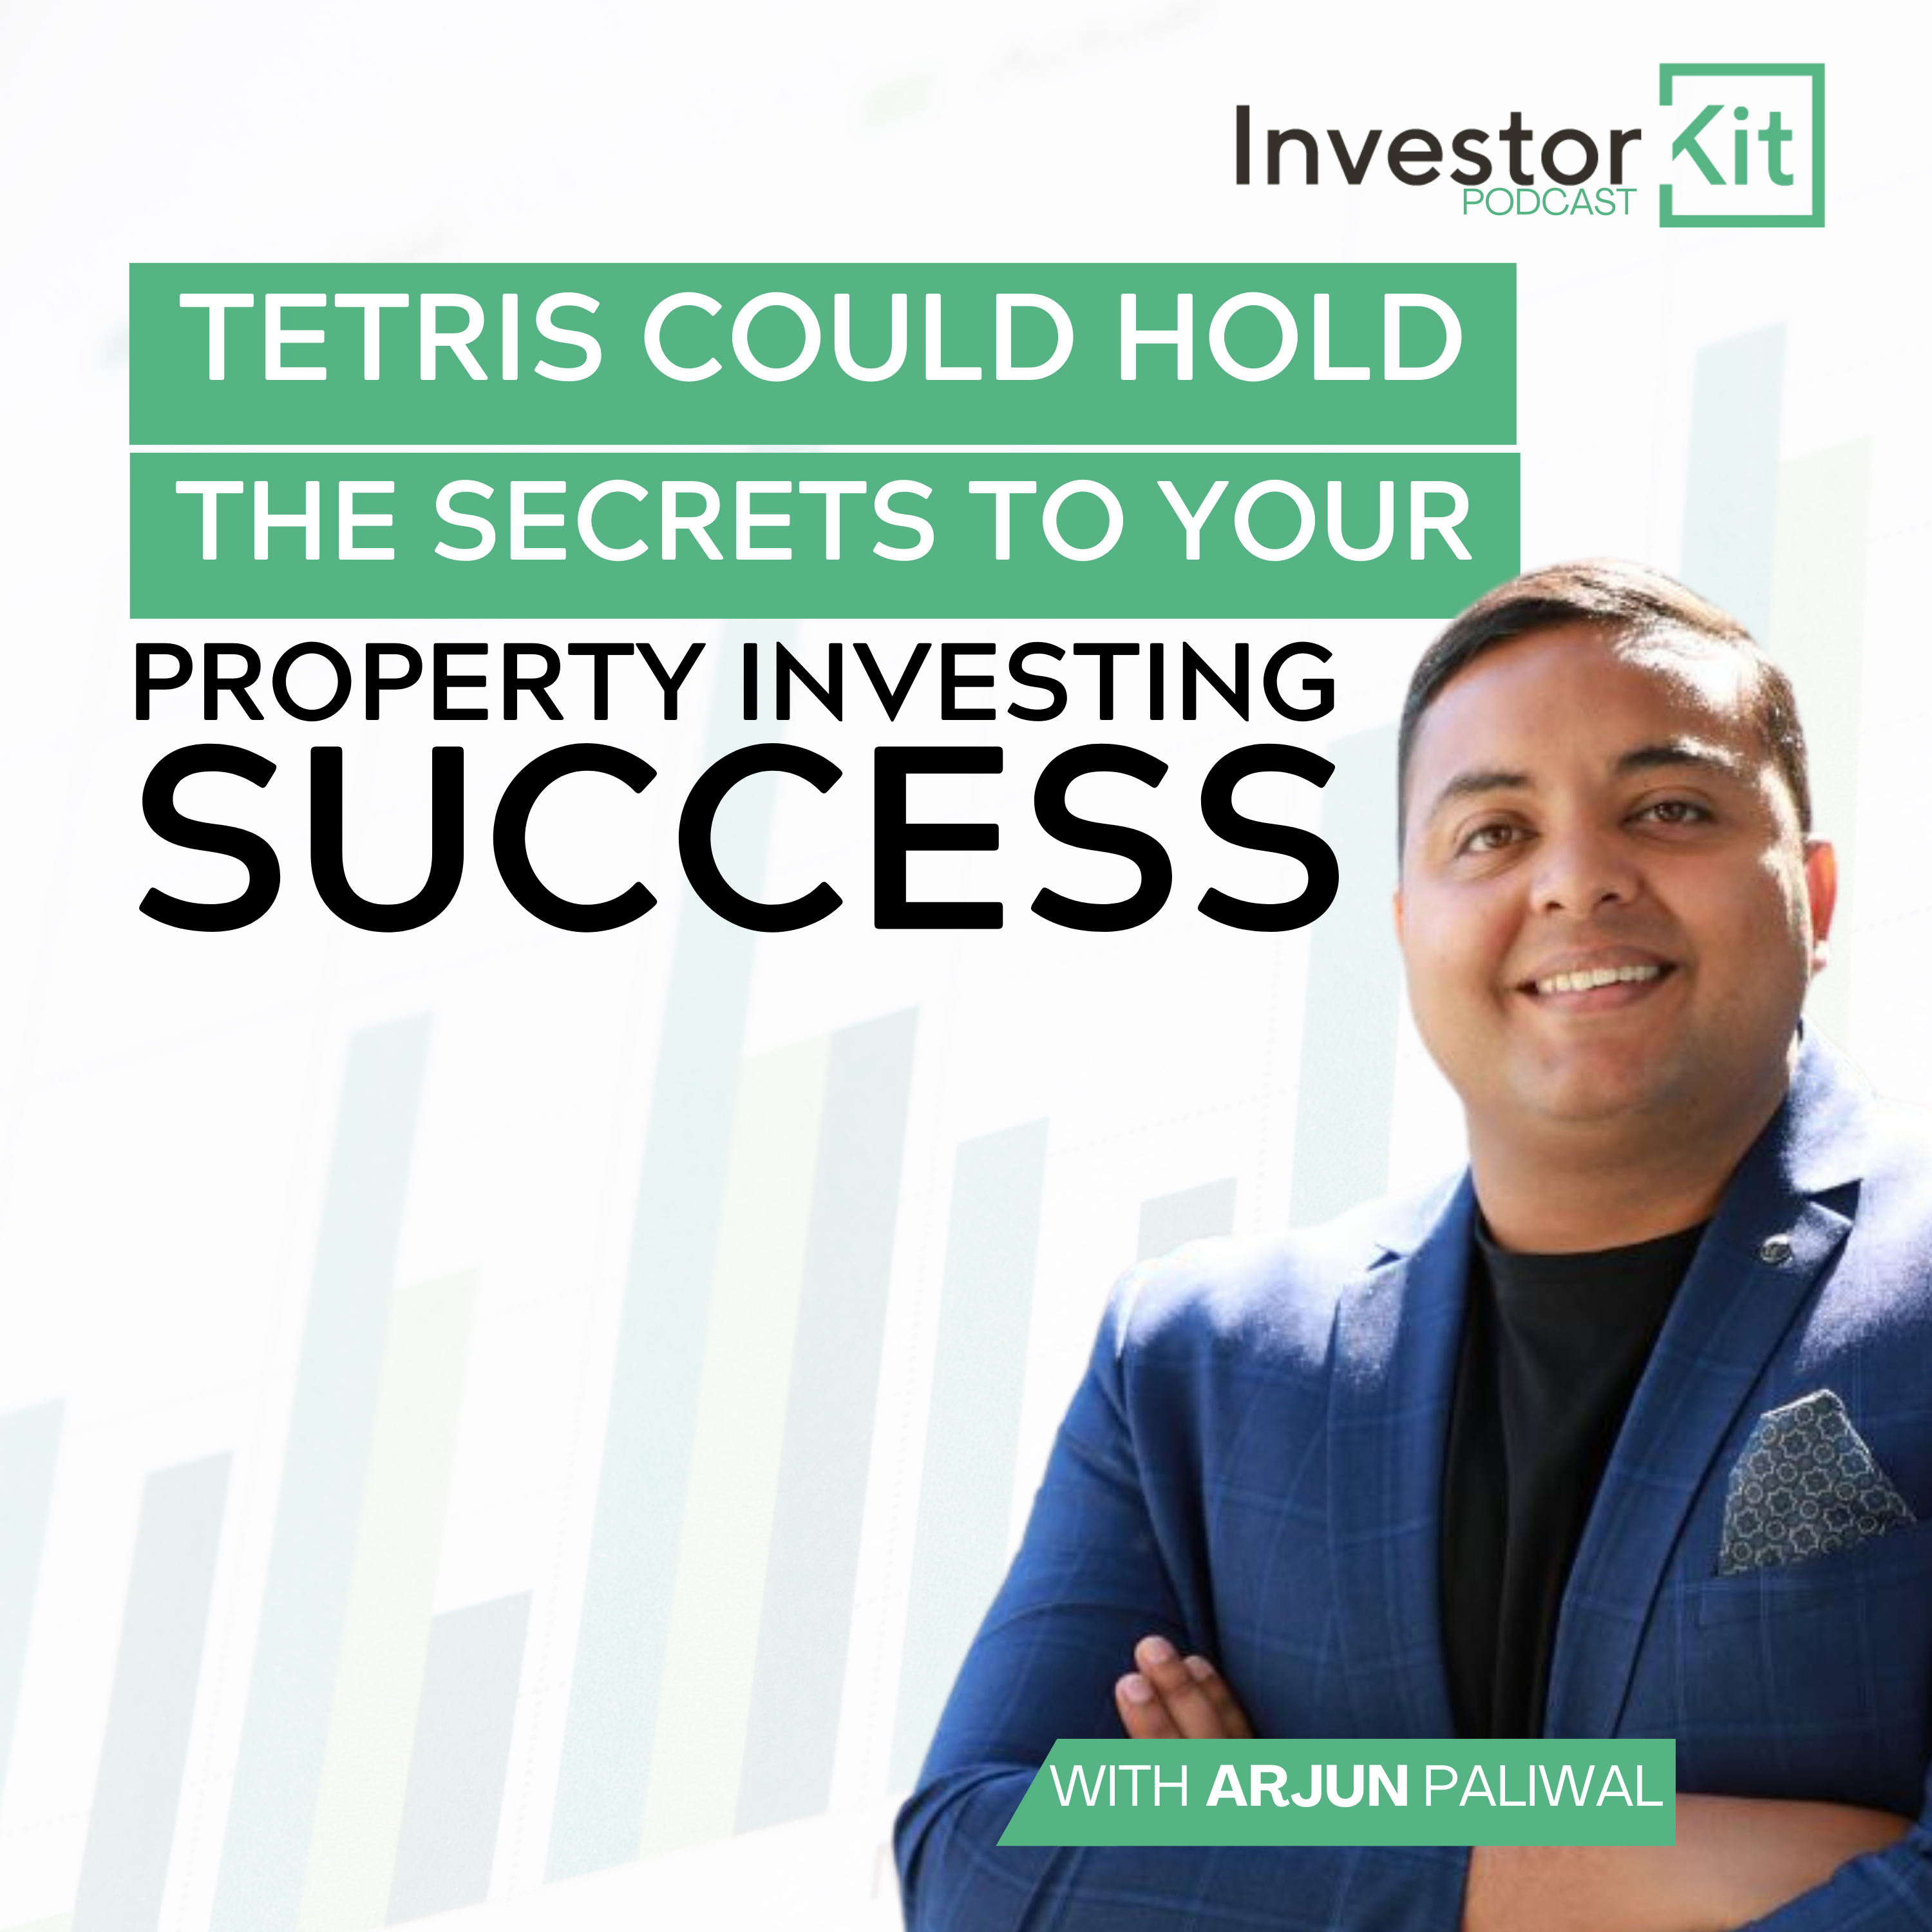 Tetris Could Hold the Secrets to Your Property Investing Success